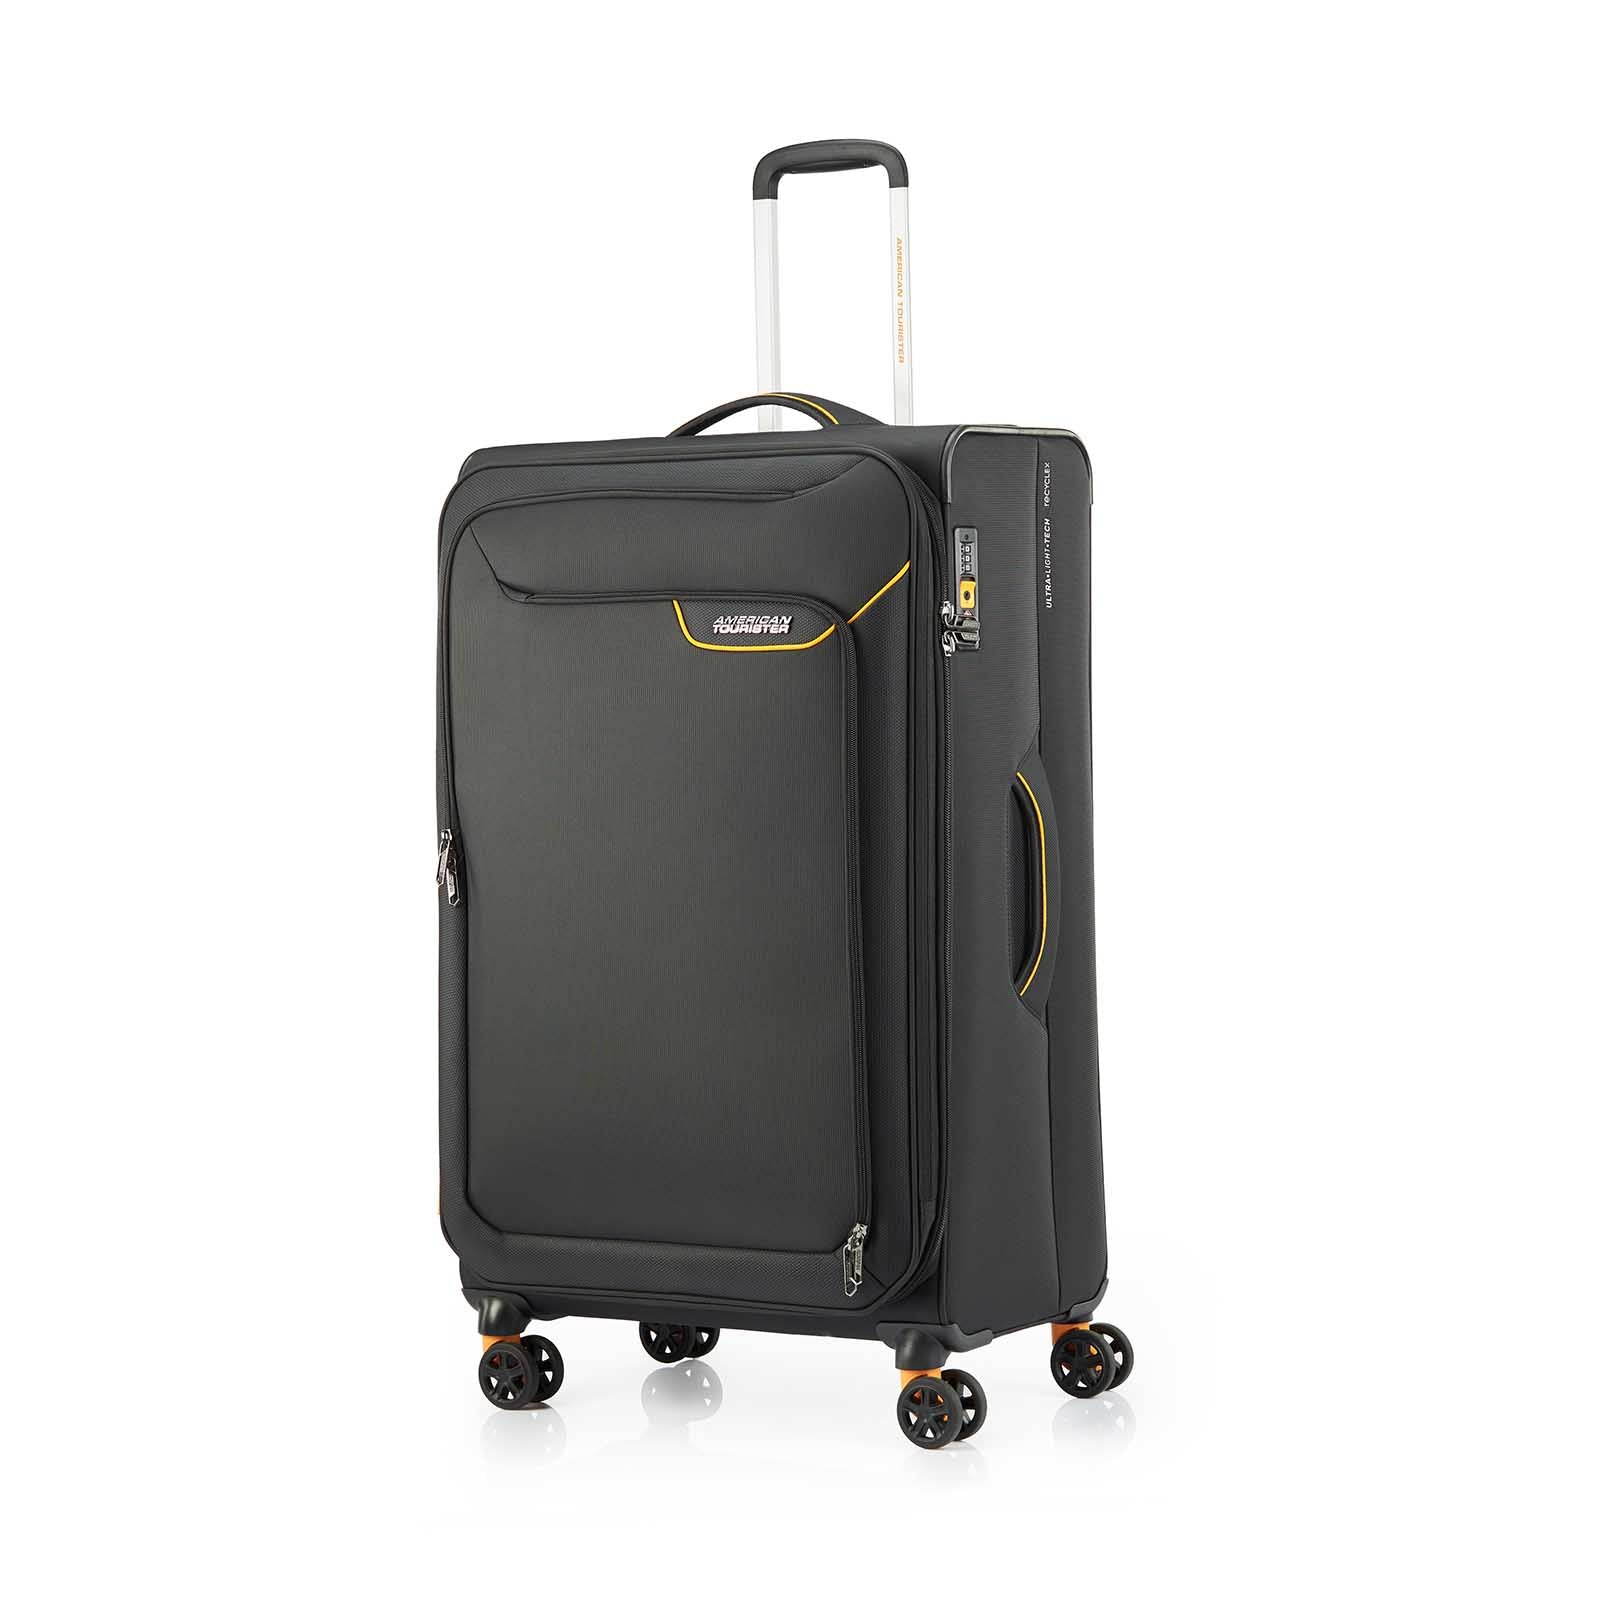 American-Tourister-Applite-4-Eco-82cm-Suitcase-Black-Mustard-Front-Angle